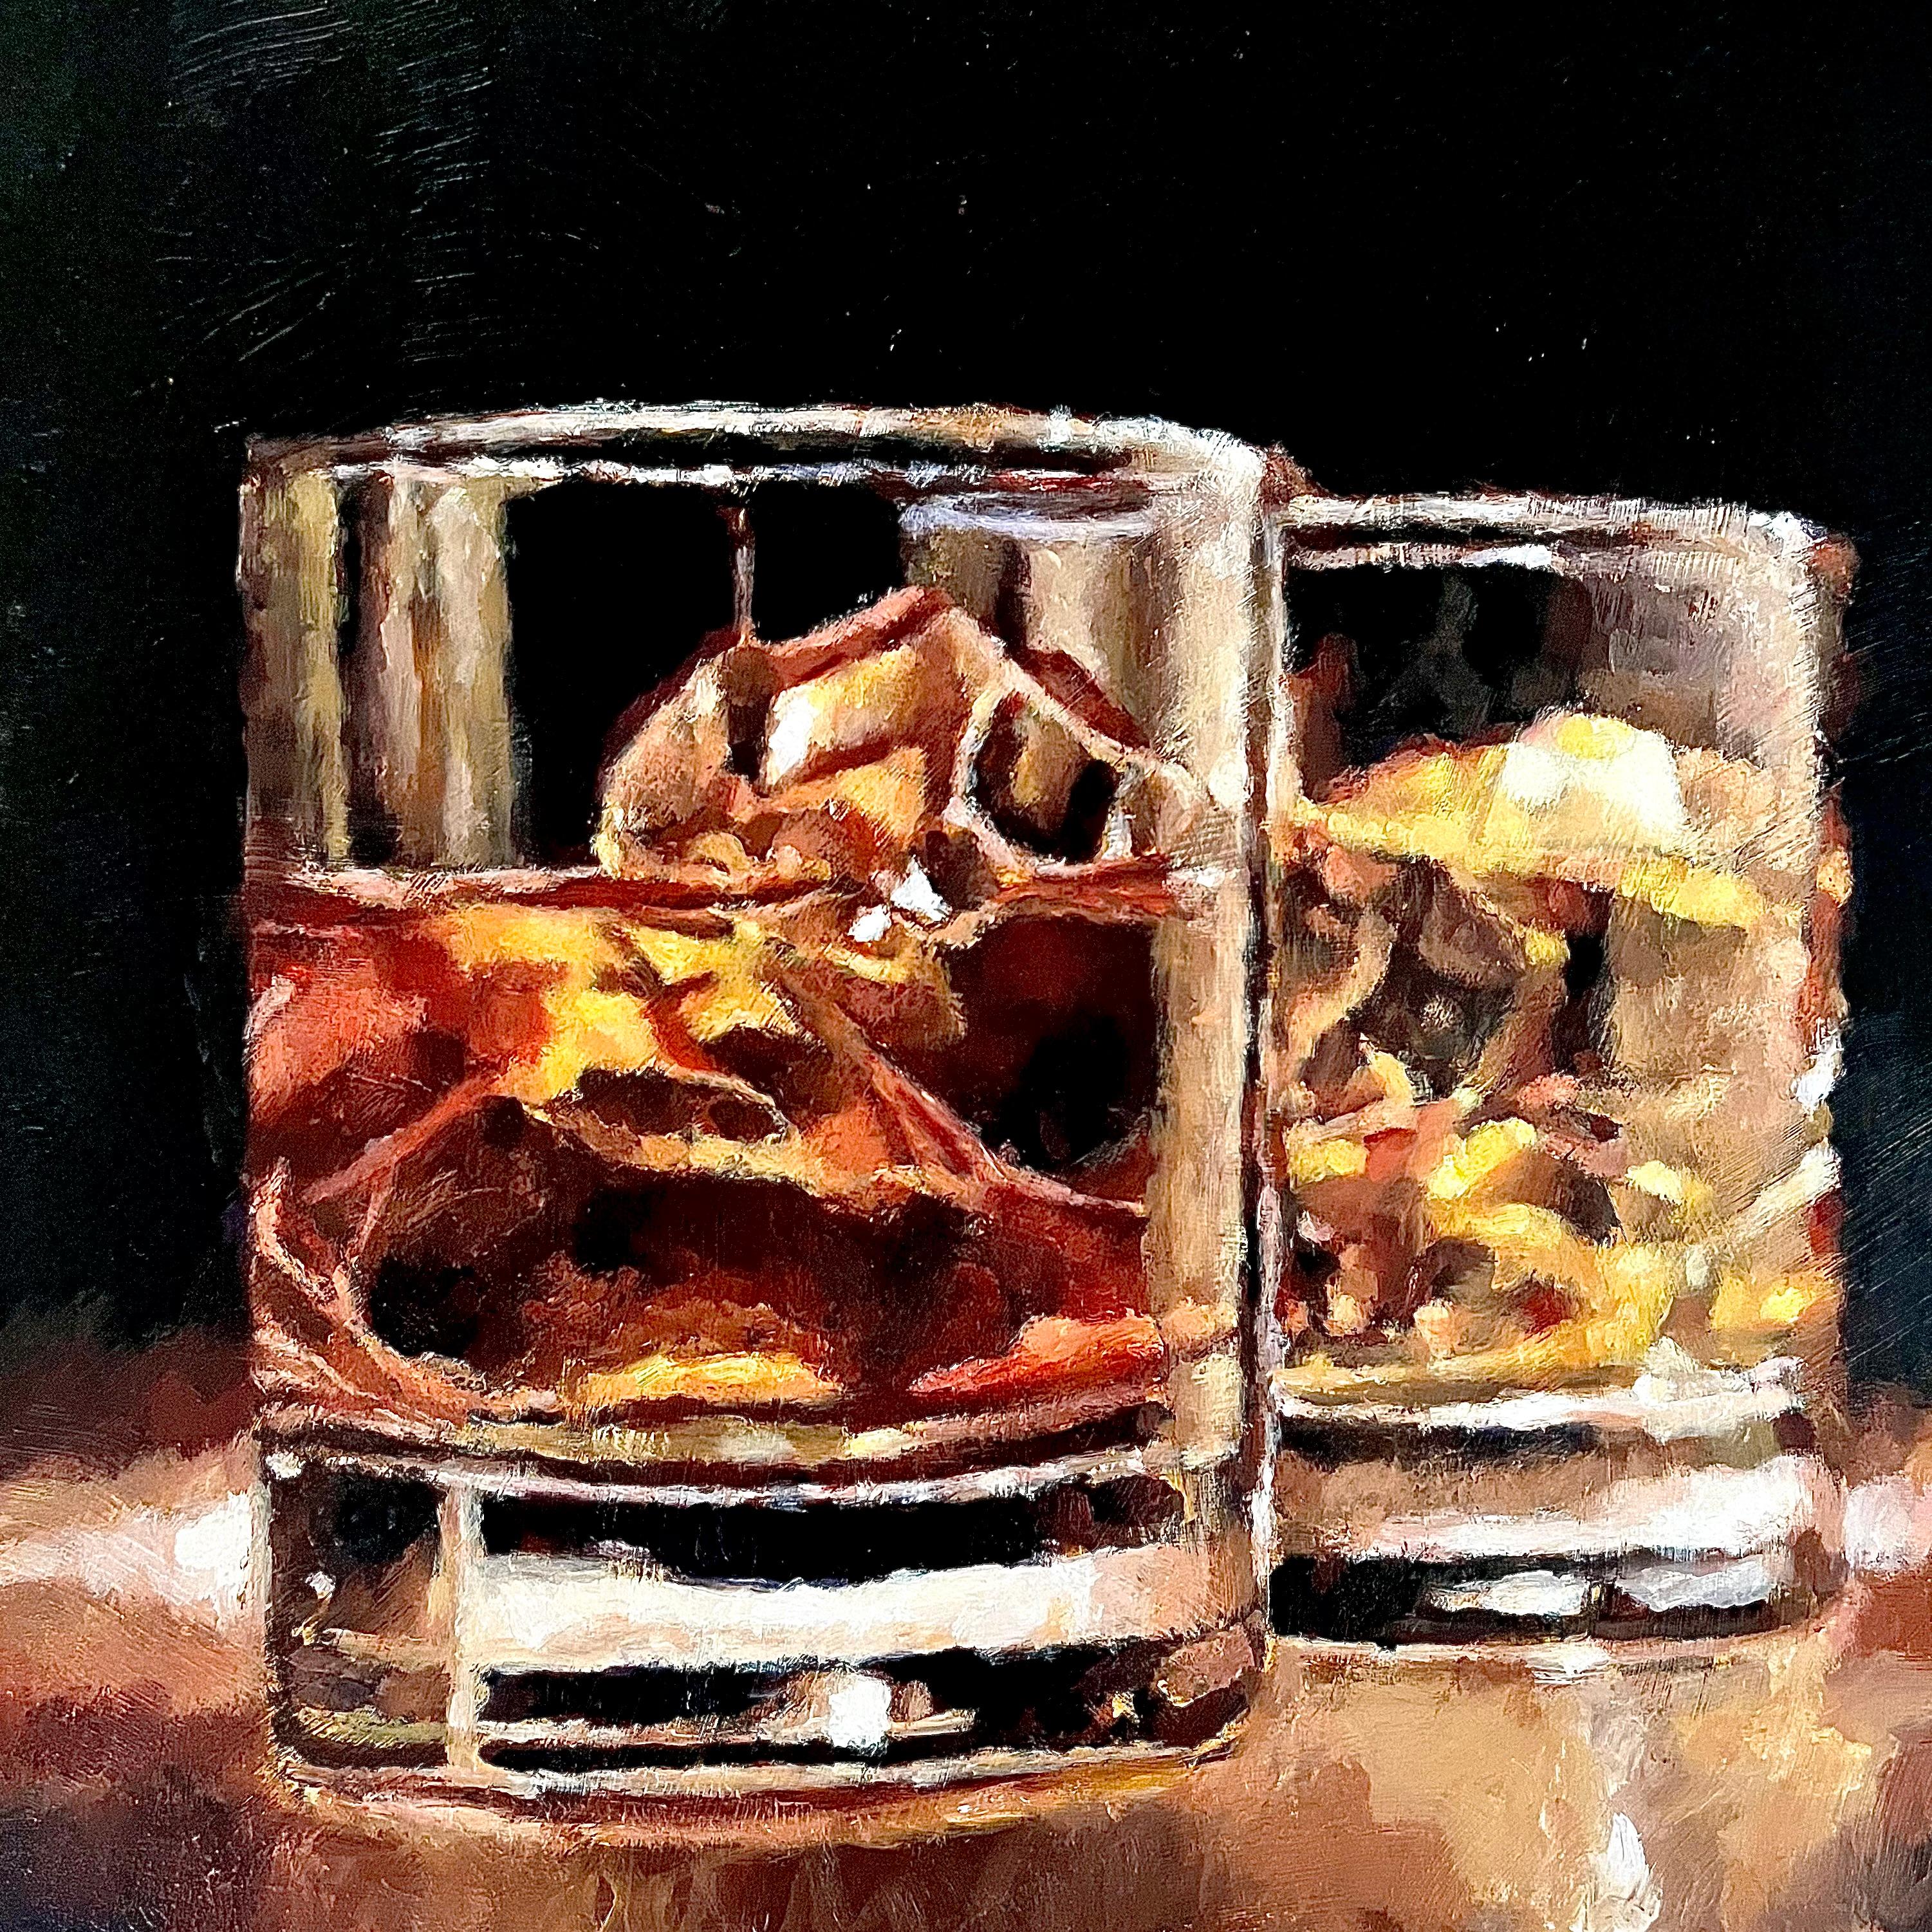 Clink, Clink, Original Painting - Art by Nava Lundy